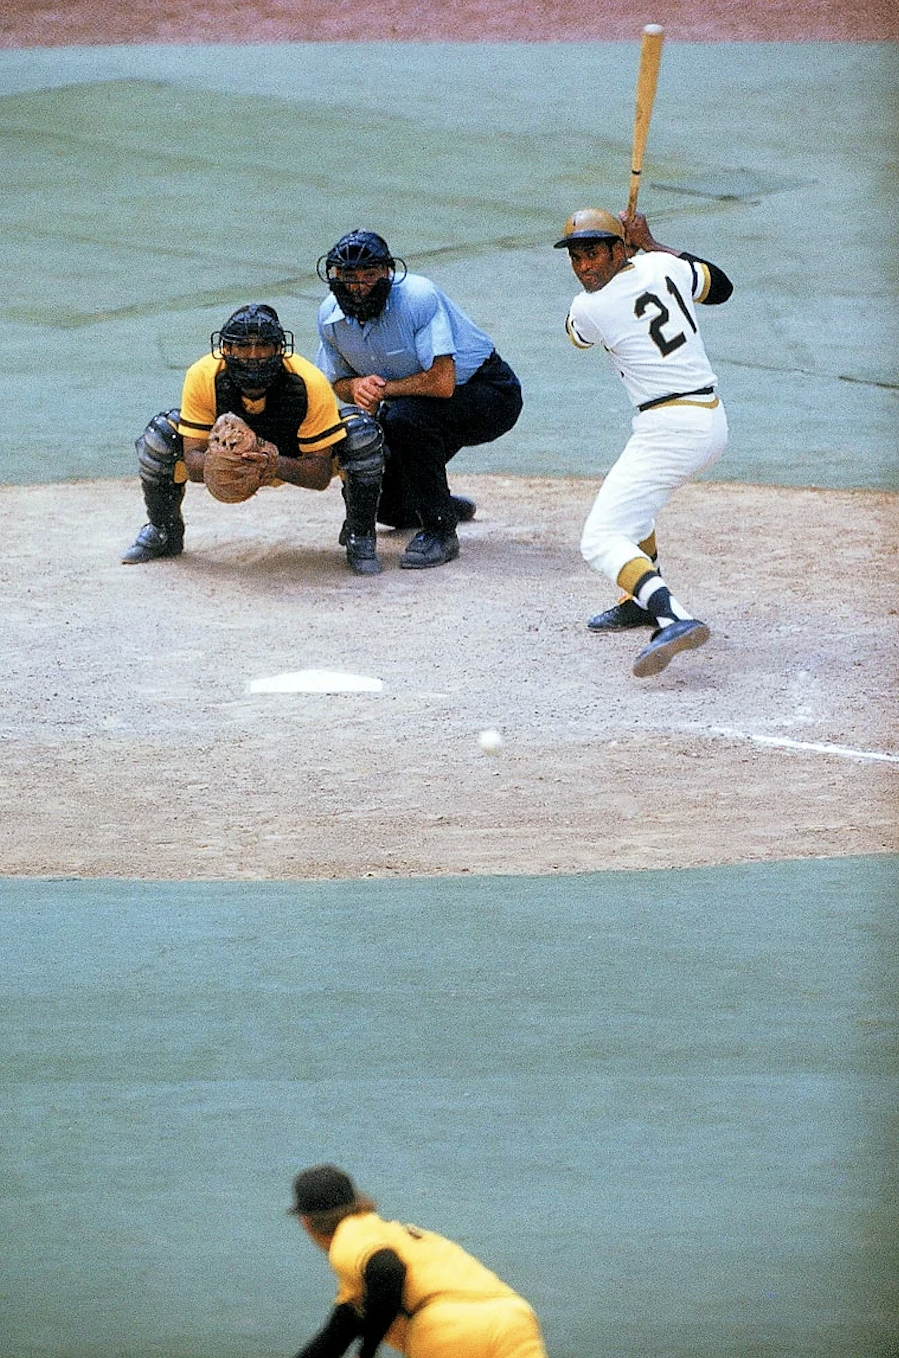 Roberto Clemente, 1972. This would be Clemente's last season before his untimely death. Photo by: Neil Leifer.